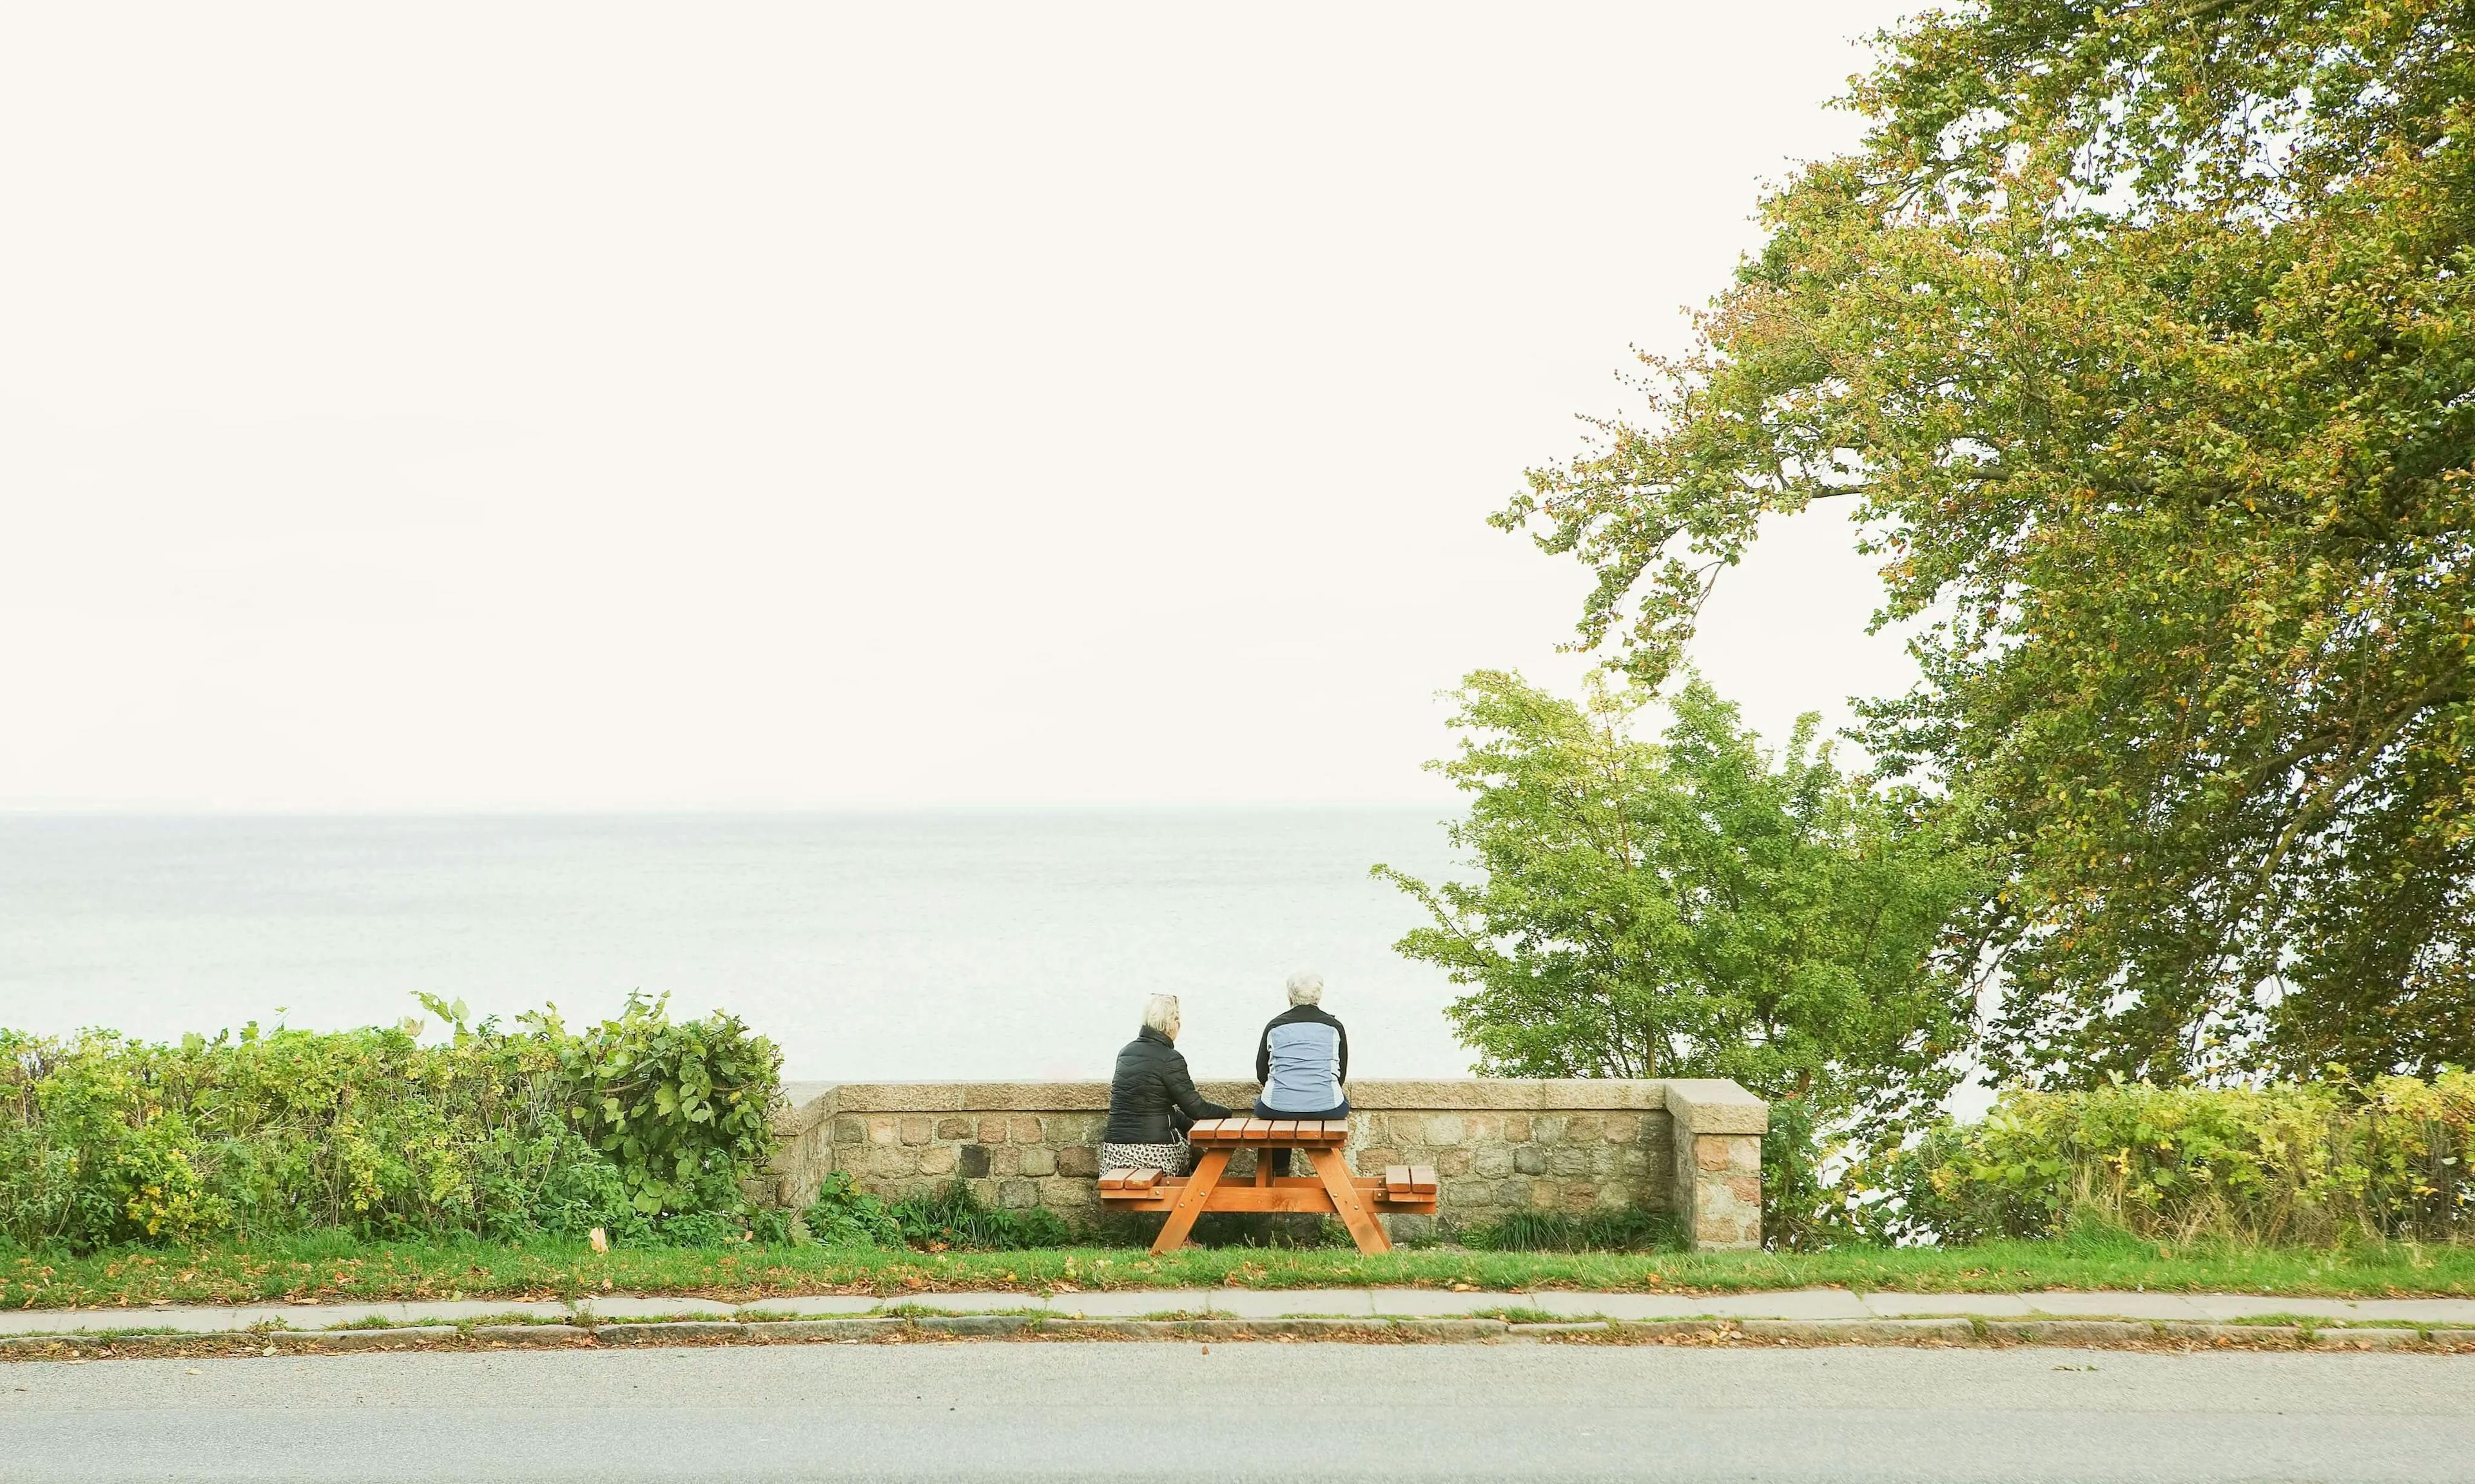 A photo of two elderly individuals engaged in conversation while seated on a bench.